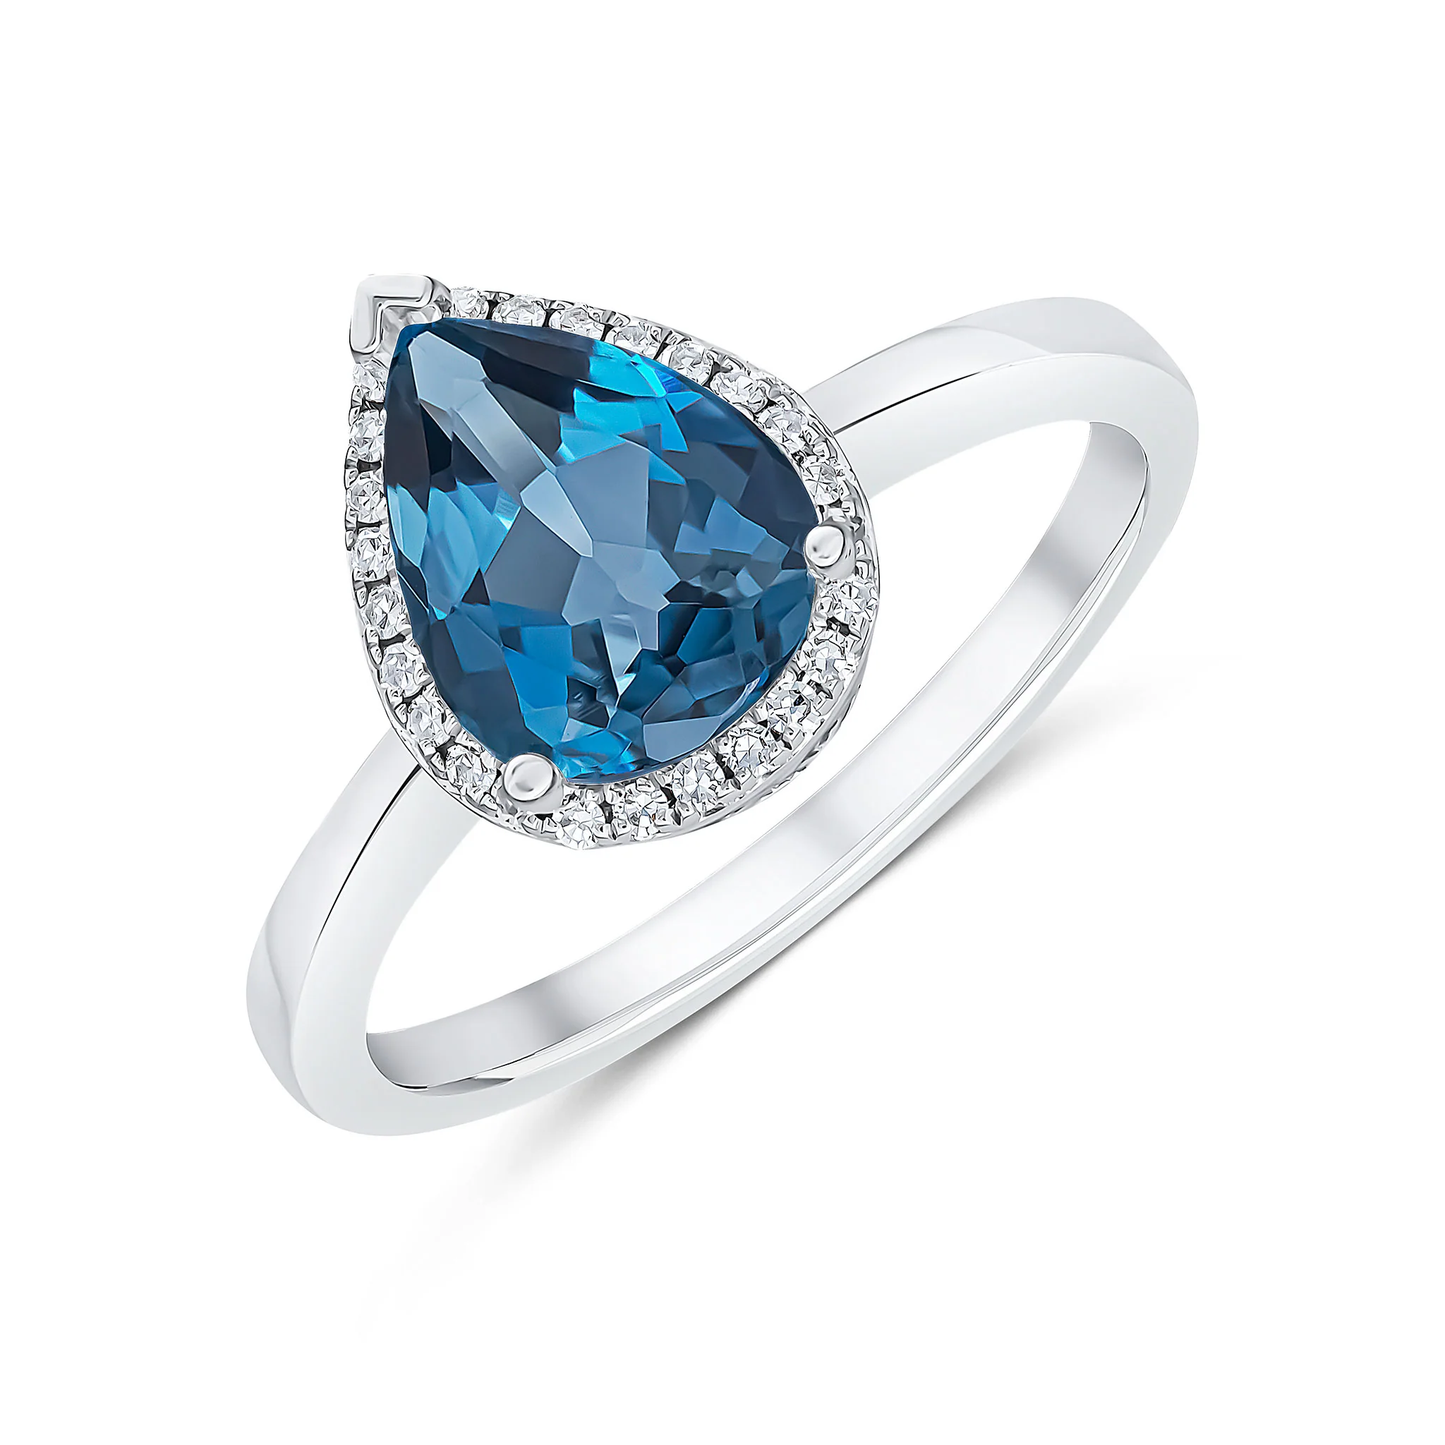 Pear Shaped London Blue Topaz & Diamond Cluster Ring in 9ct White Gold